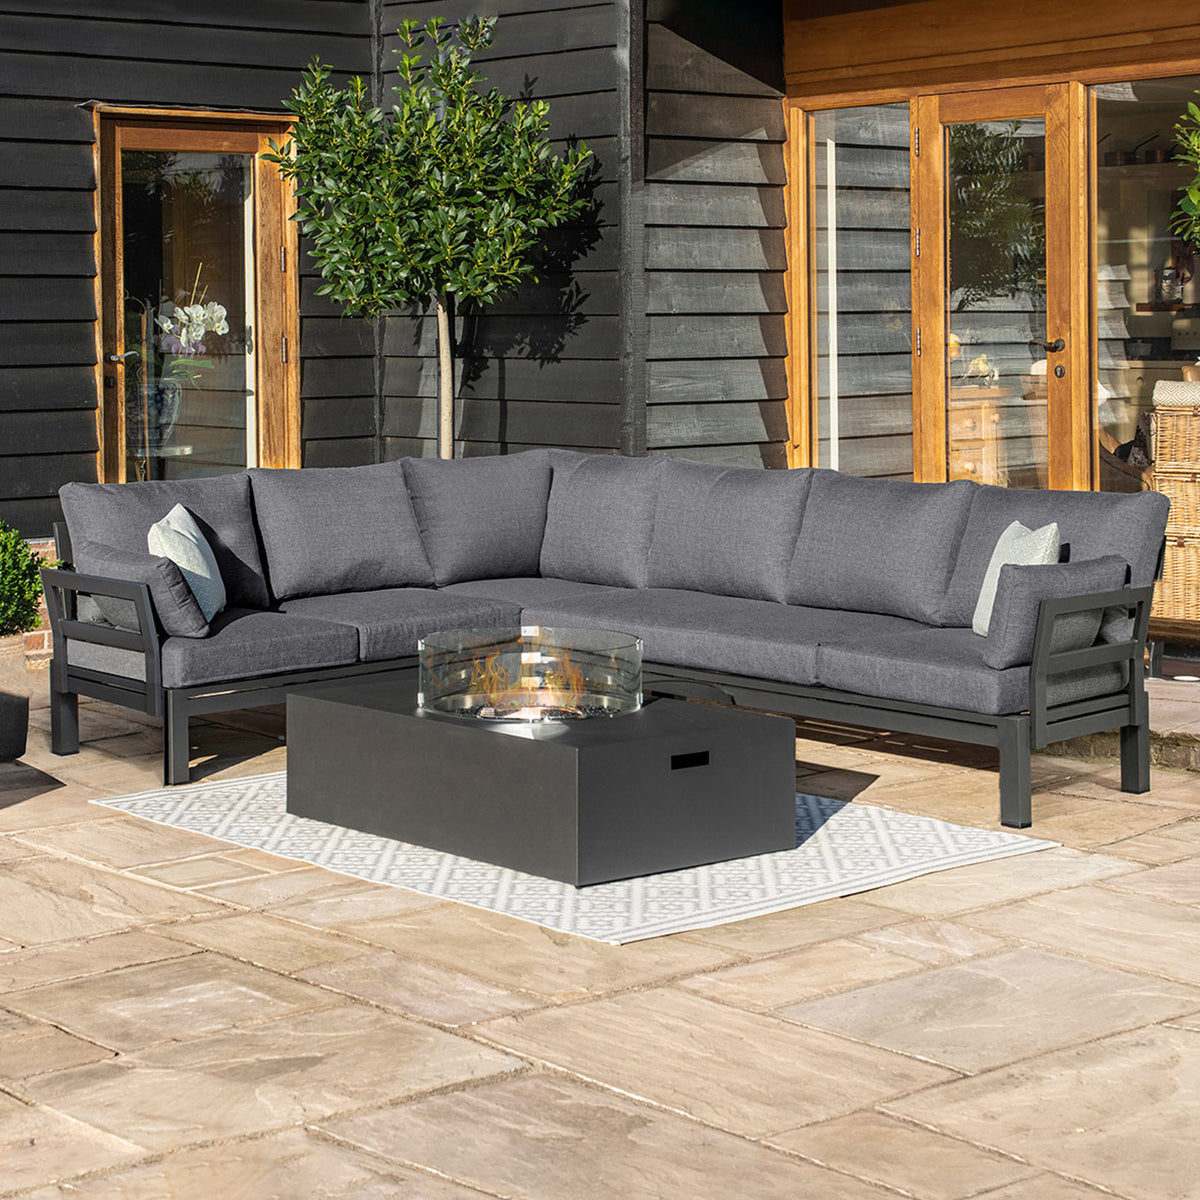 Maze Oslo Grey Outdoor Corner Group with Rectangular Fire Pit Table from Roseland Furniture